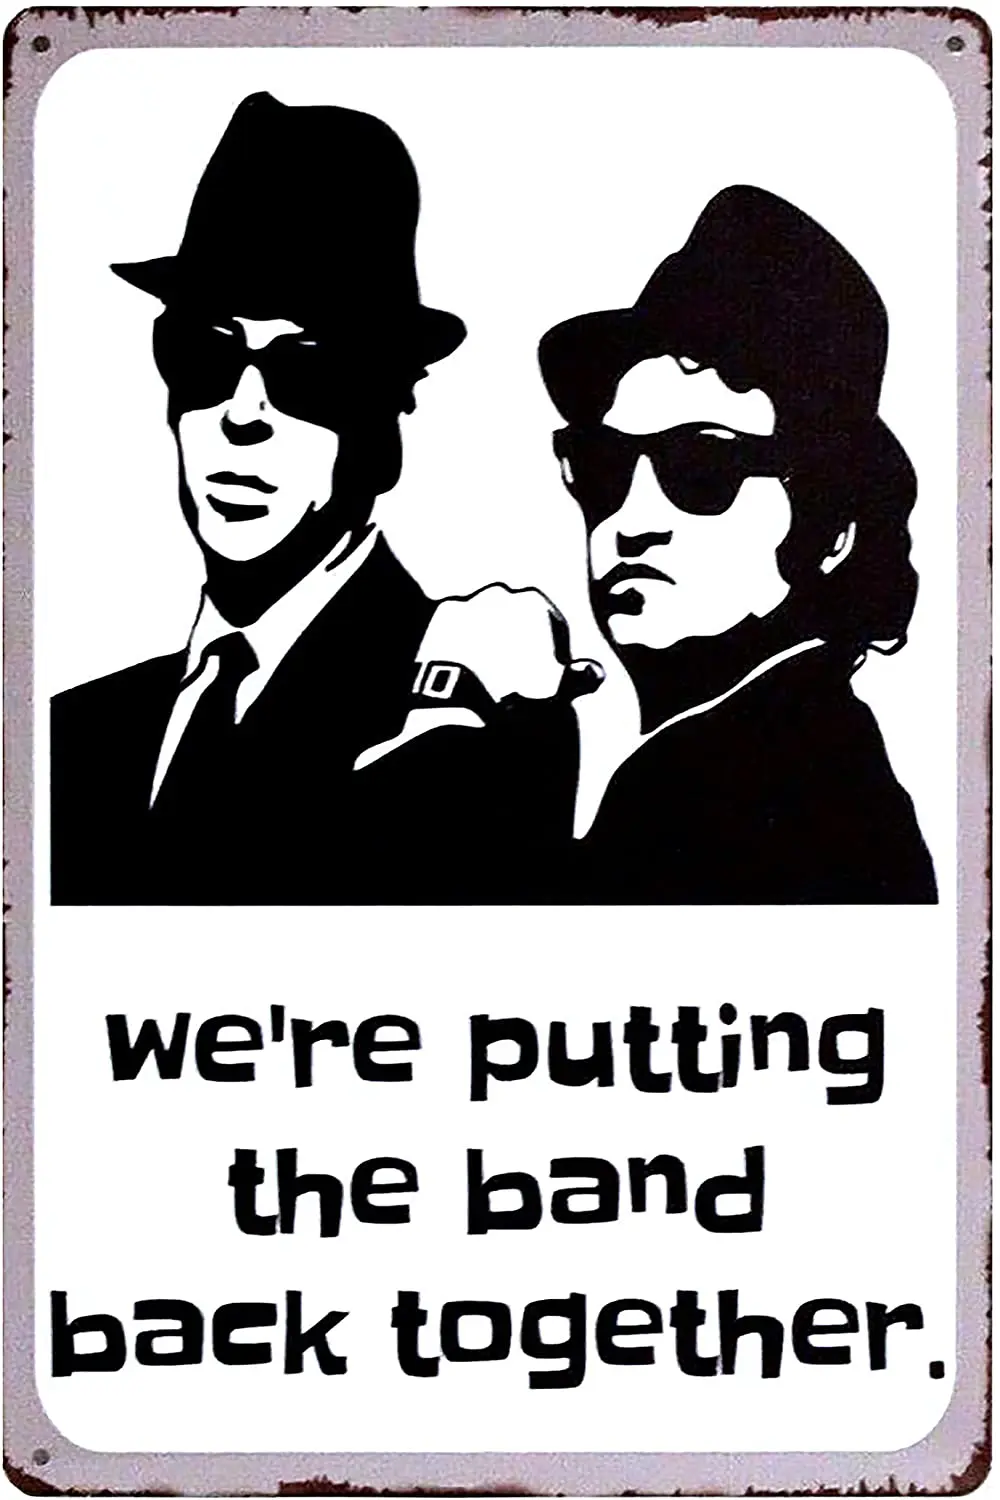 

Blues Brothers Tin Sign Man Cave Concert Poster Putting The Band Back Together Tin Metal Sign 8x12 Inch